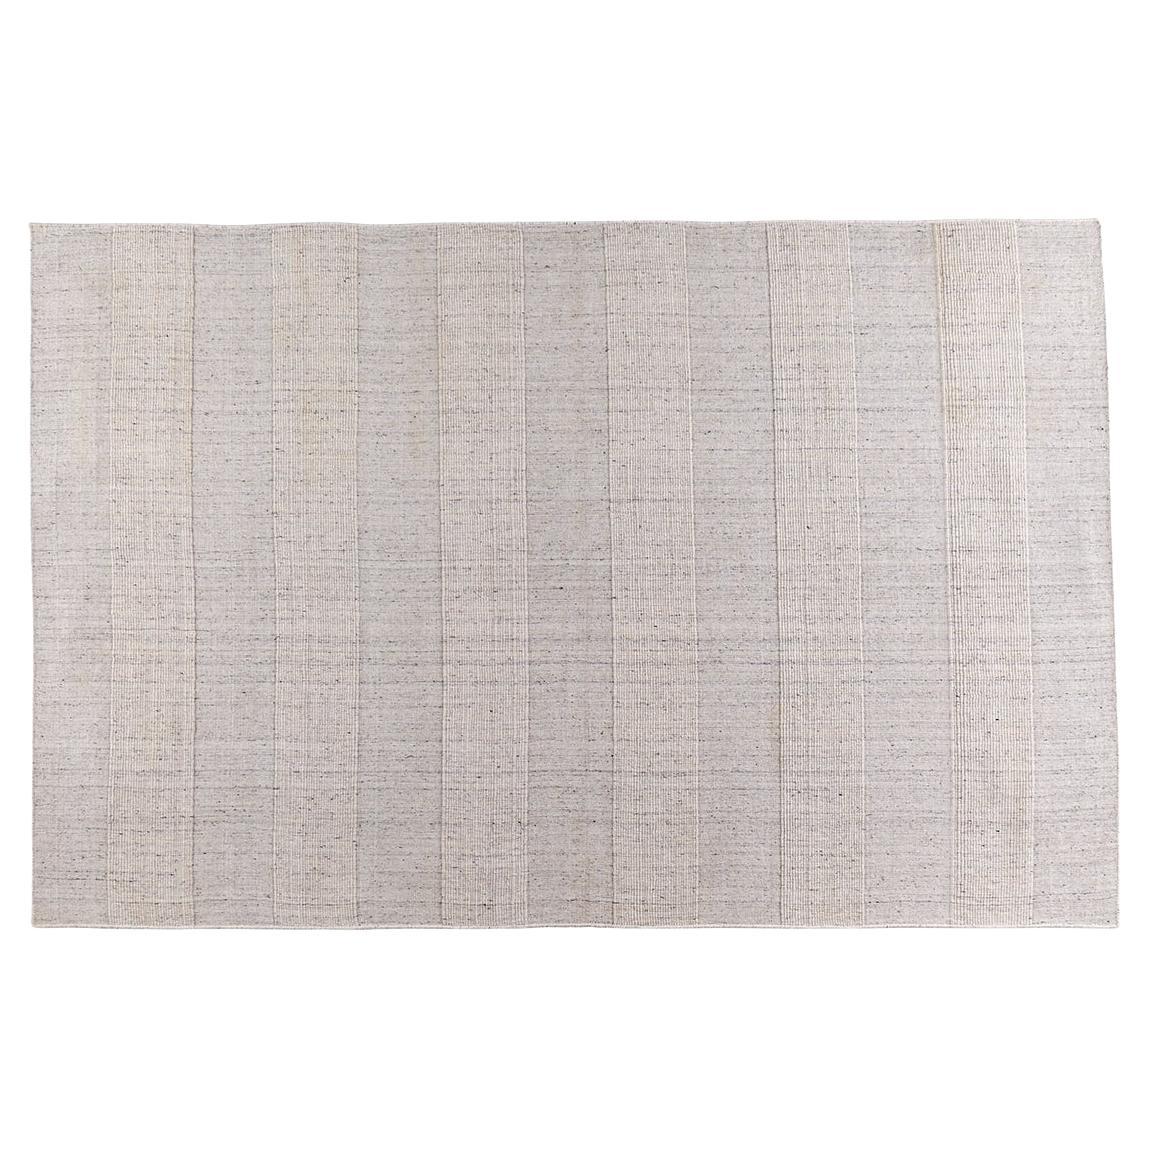 'Mithun' Rug hand-woven in sustainable, eco-friendly Wool mix, 170 x 240 cm